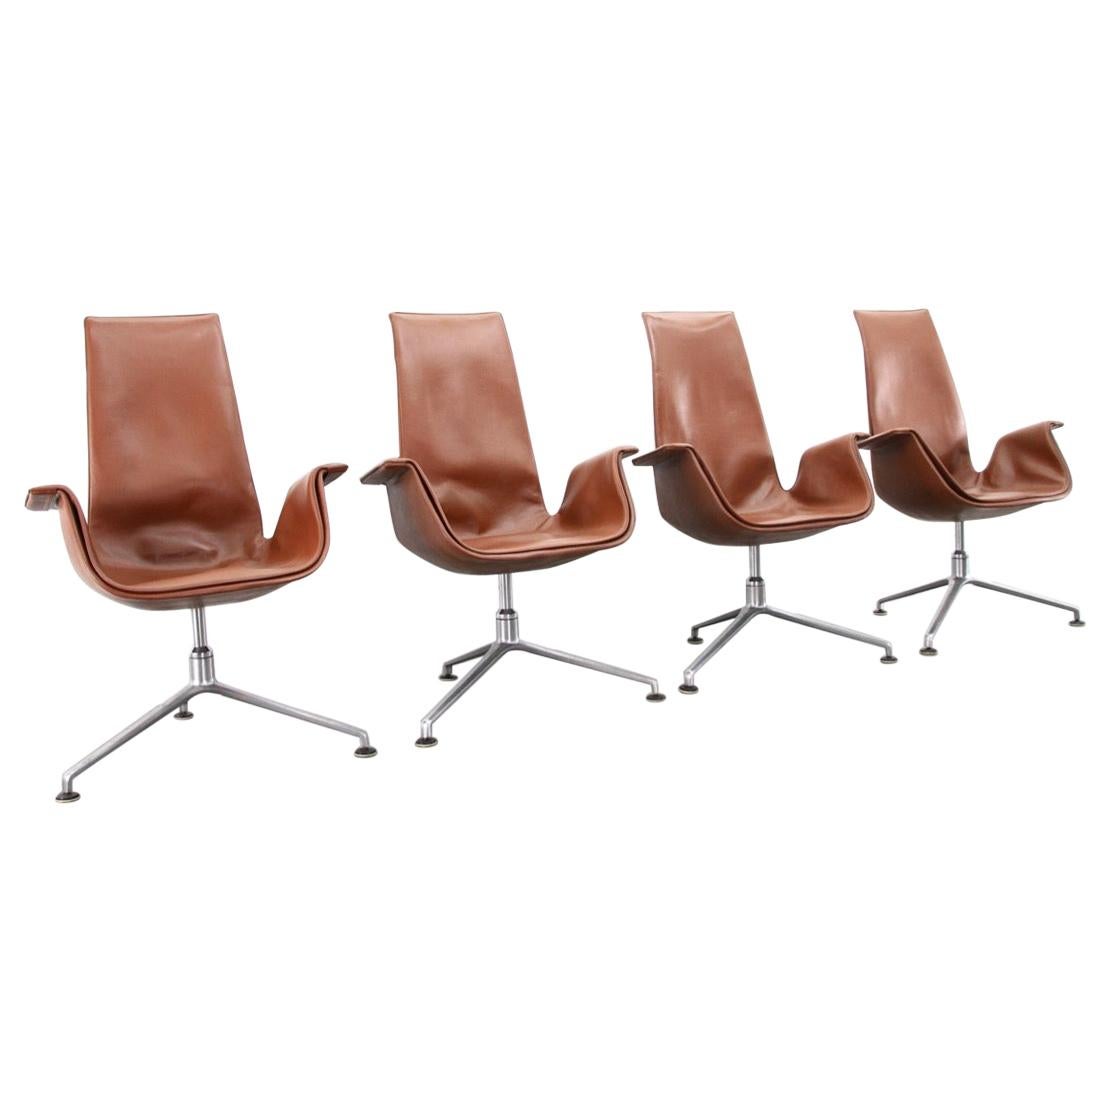 Fabricius & Kastholm Tulip Chairs in Cognac Leather